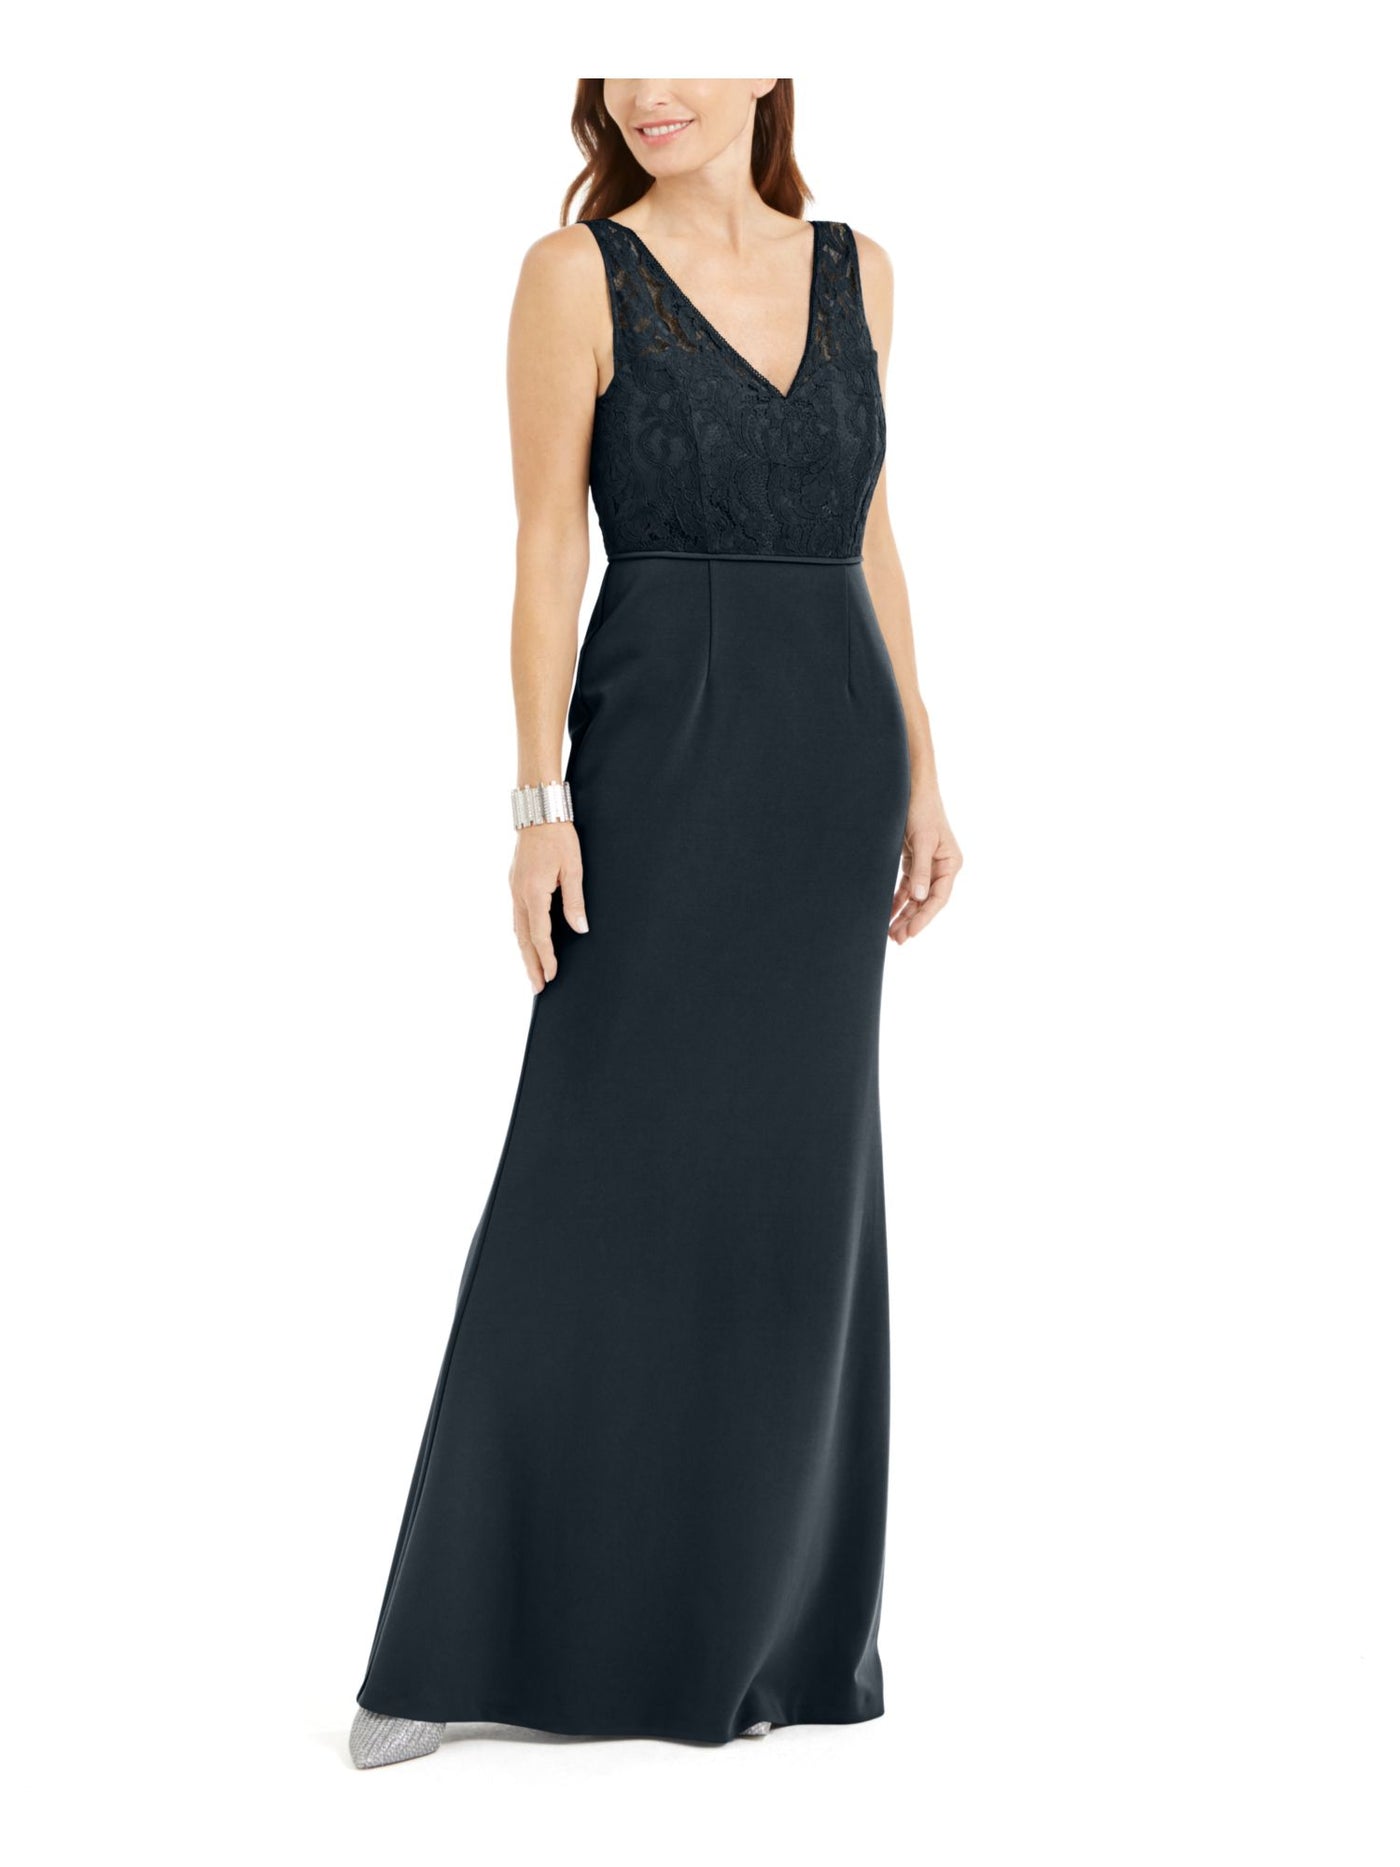 ADRIANNA PAPELL Womens Slitted Zippered Illusion Gown Sleeveless V Neck Full-Length Formal Dress